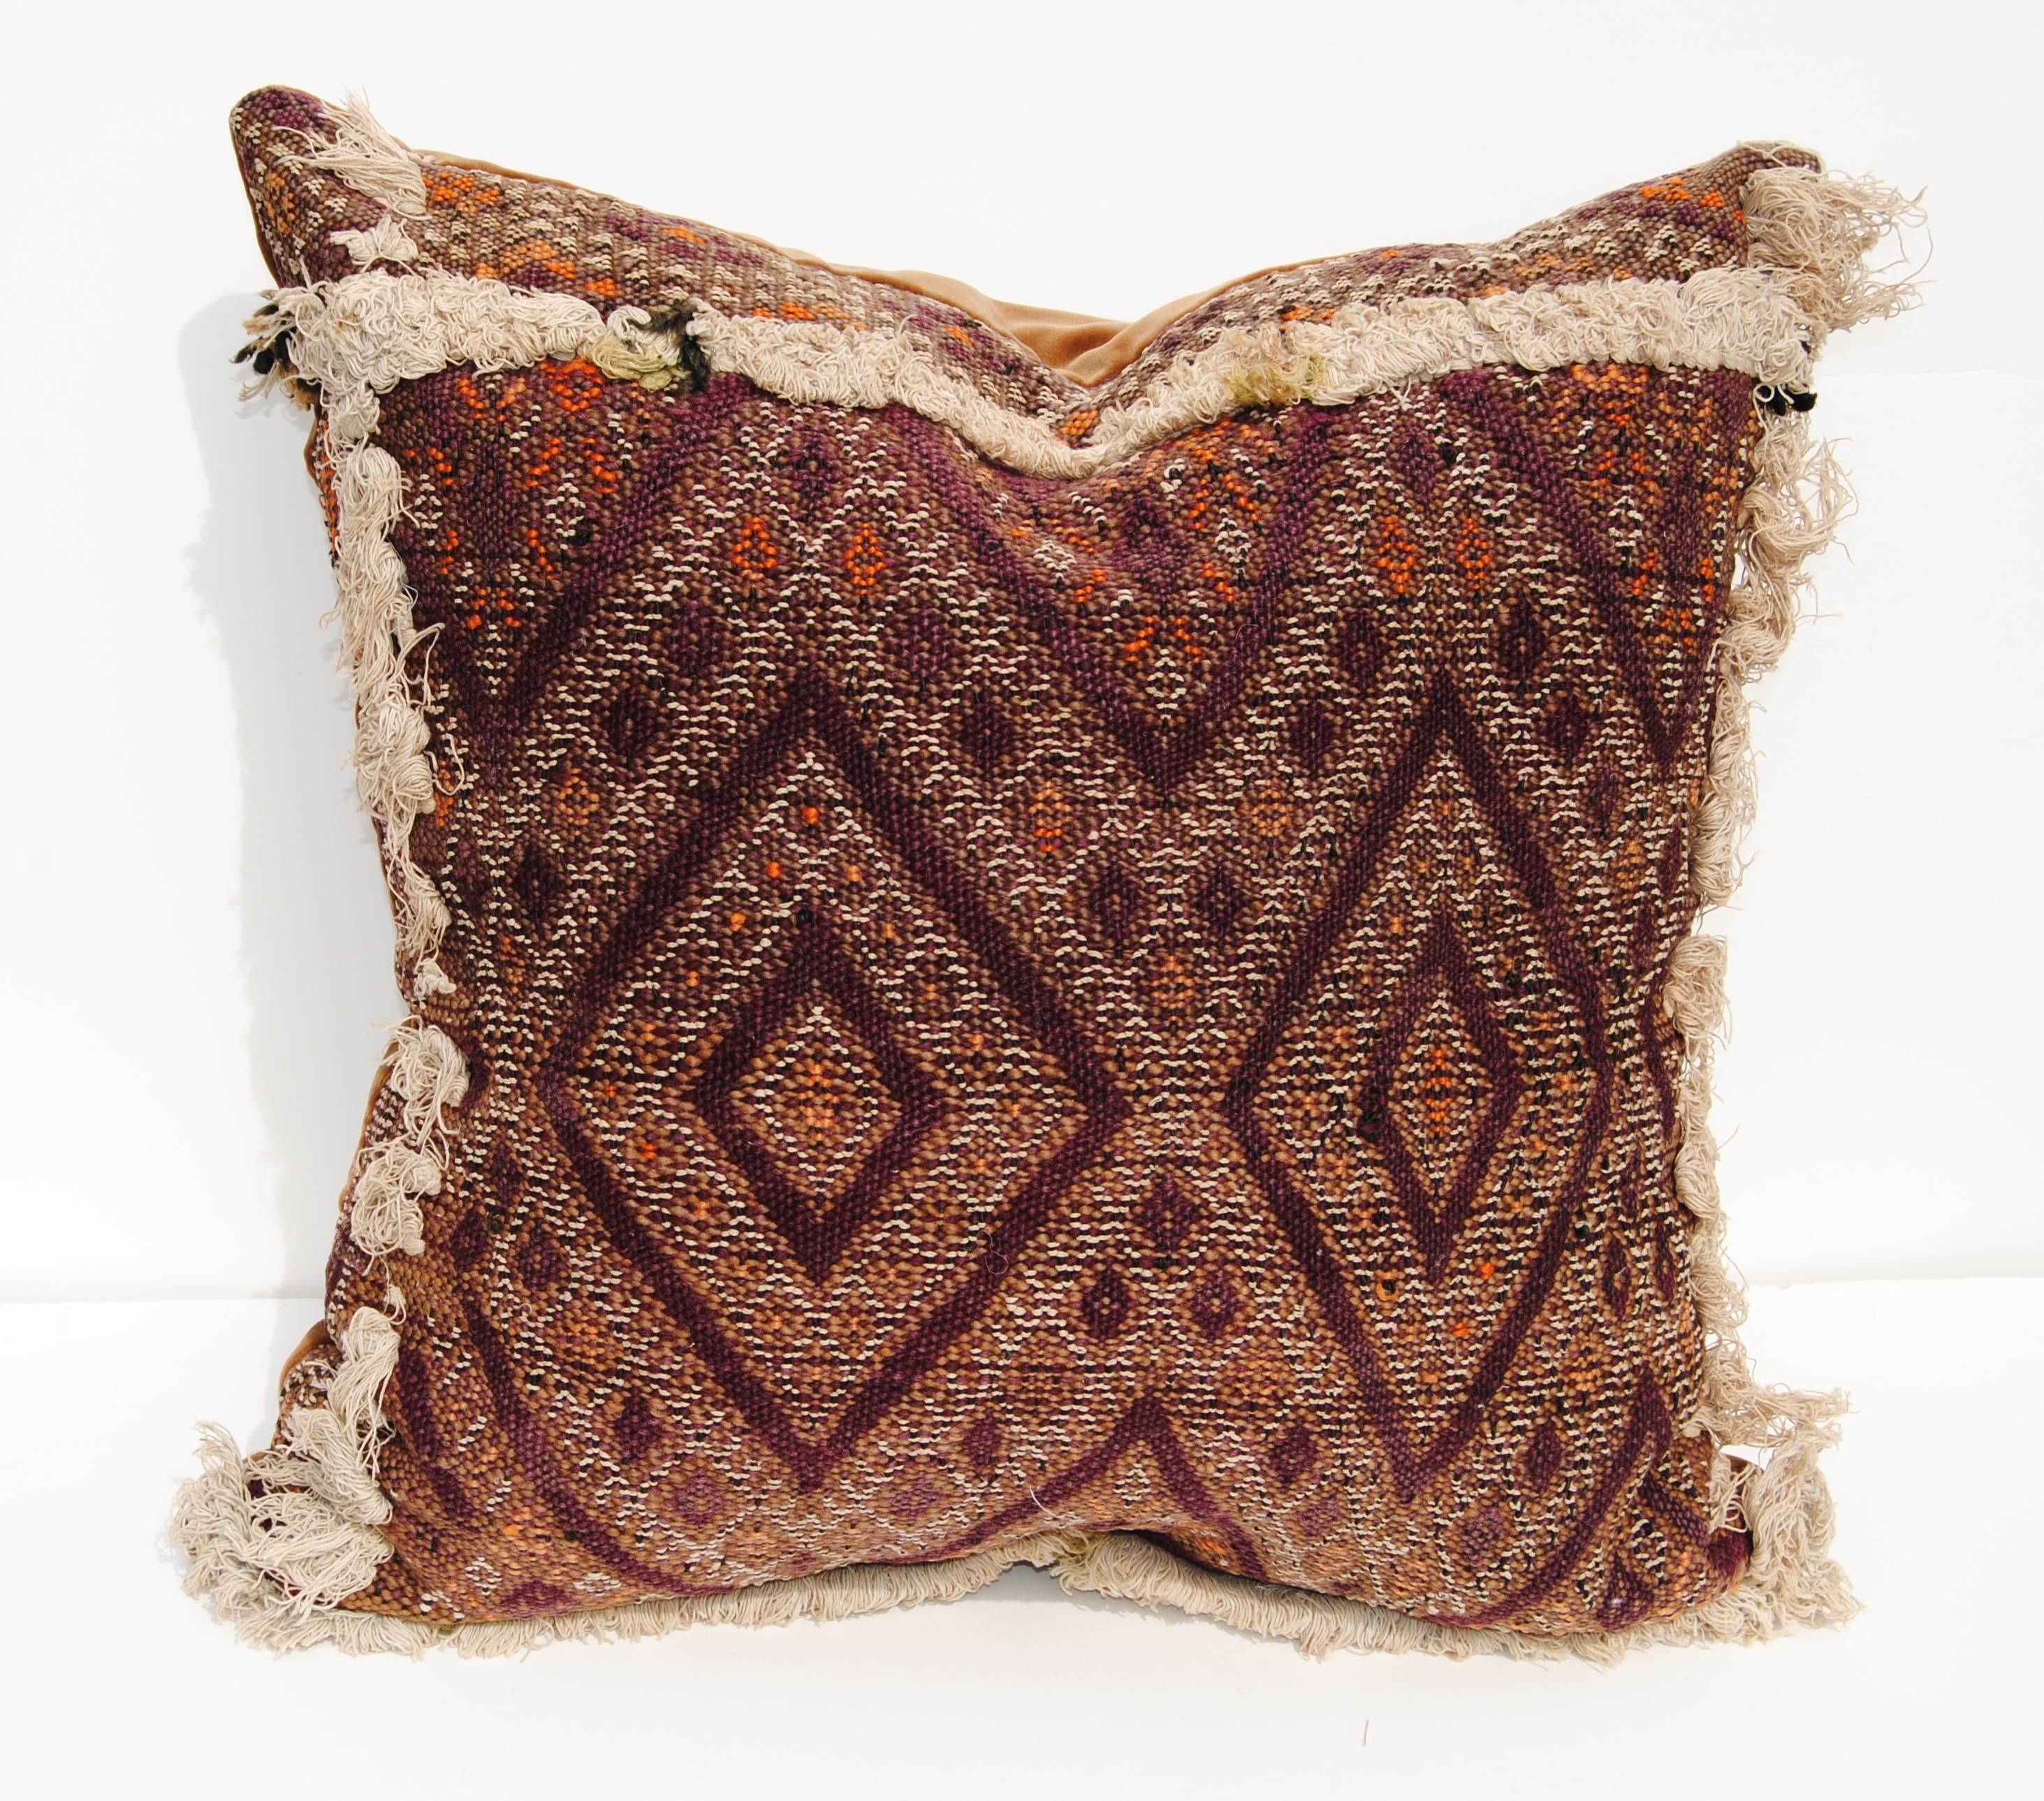 Custom pillow cut from an antique hand loomed wool Moroccan Berber rug from the Atlas mountains. The textile is about 100 years old and each panel was woven with a different tribal design with a hand tufted natural color cotton border. Rich natural